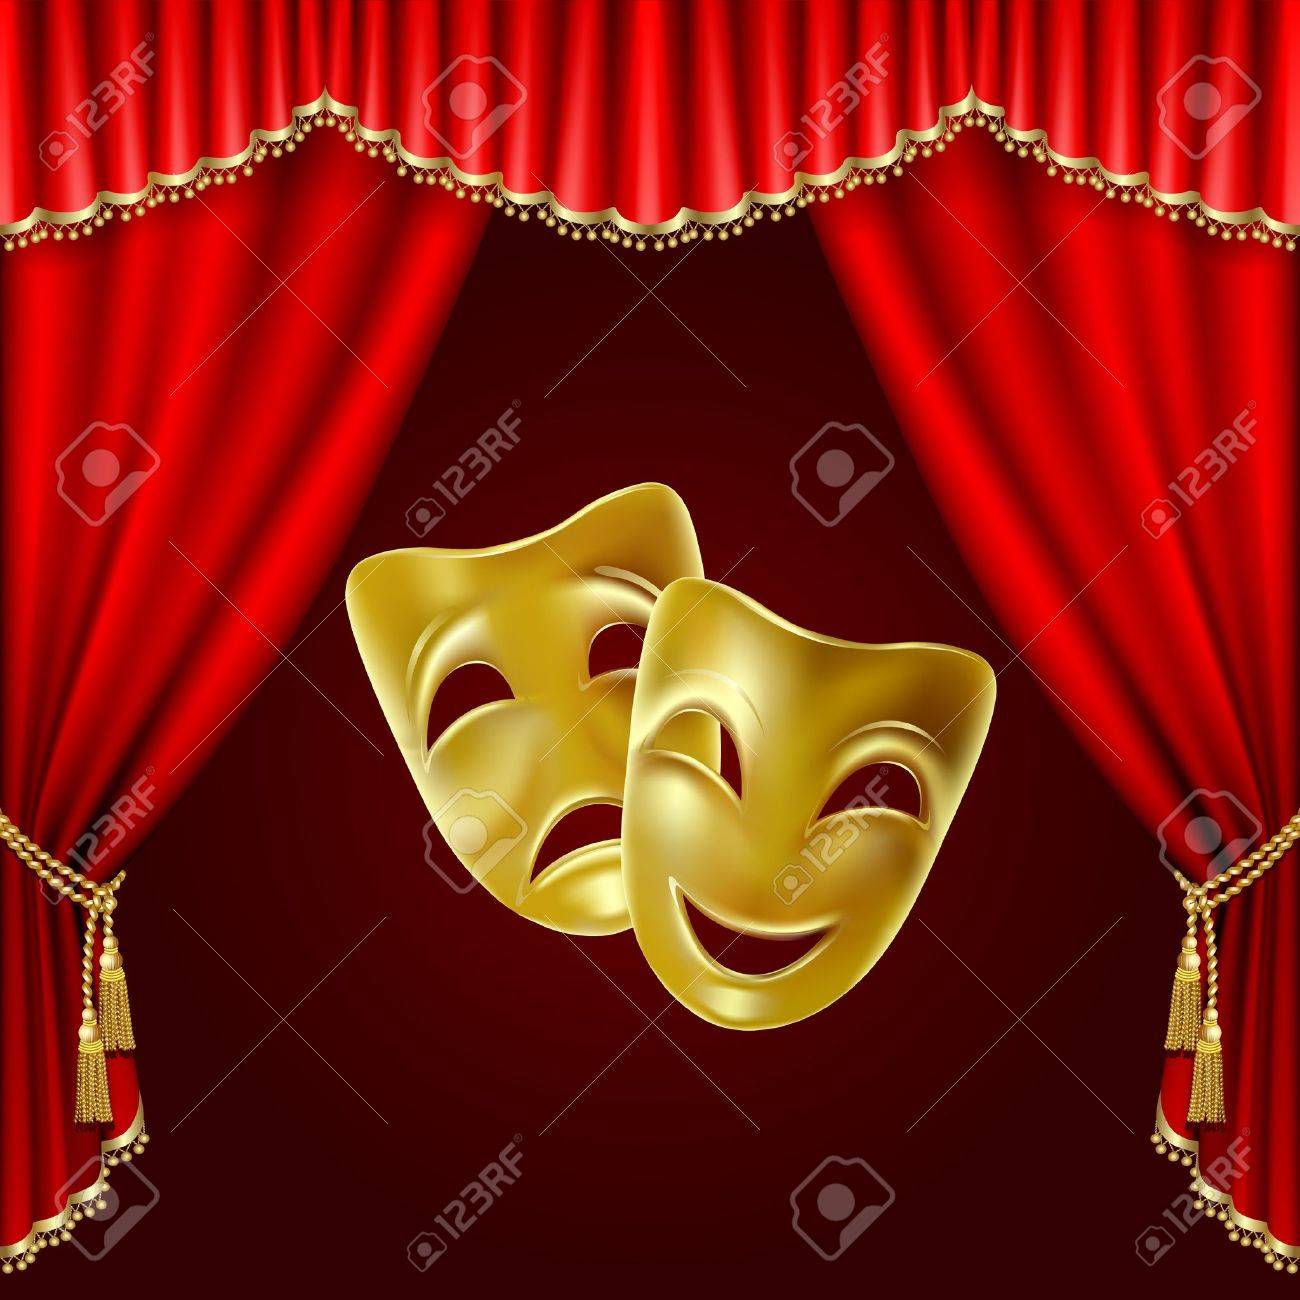 Theatrical Mask On A Red Background Mesh Clipping Royalty